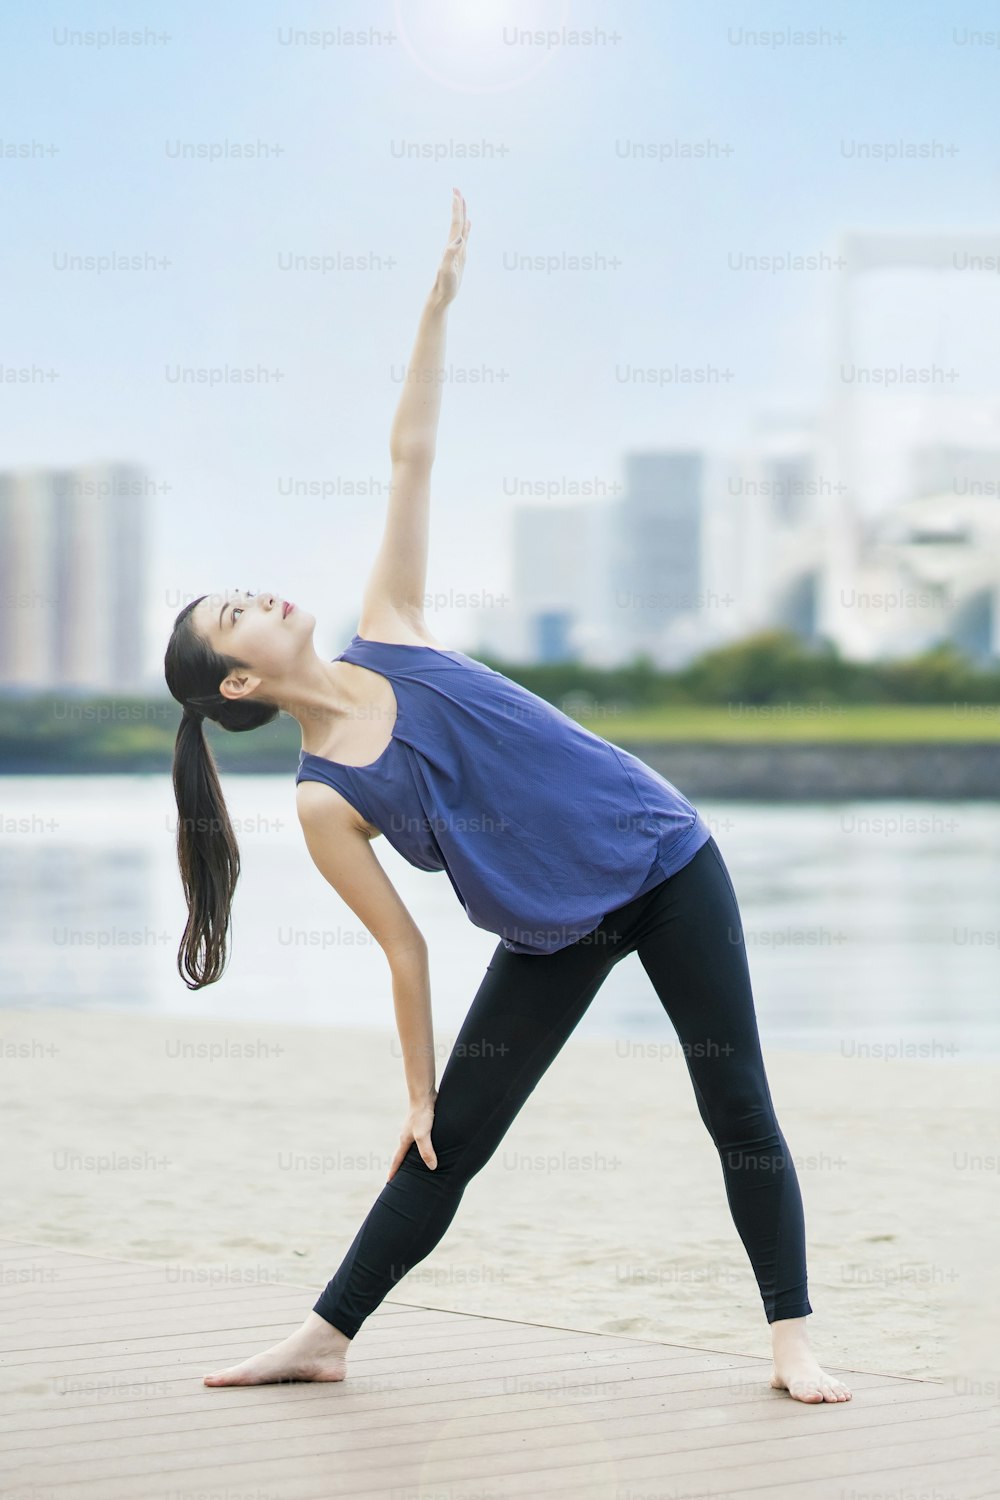 Asian young woman doing yoga on the beach in the city